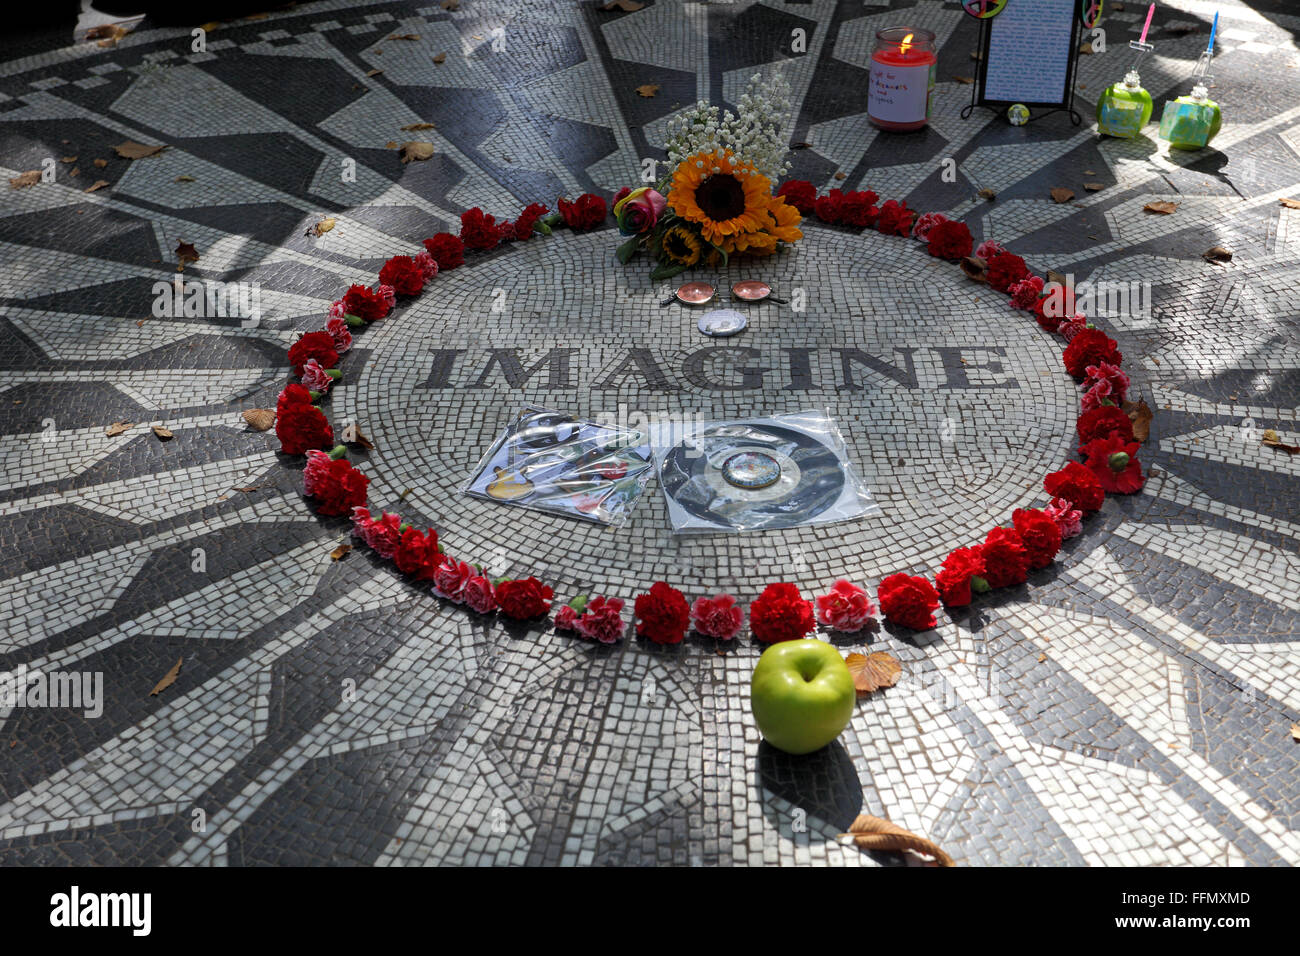 John Lennon, band playing The Beatles, Strawberry Fields, Central Park, New York City, USA, Stock Photo